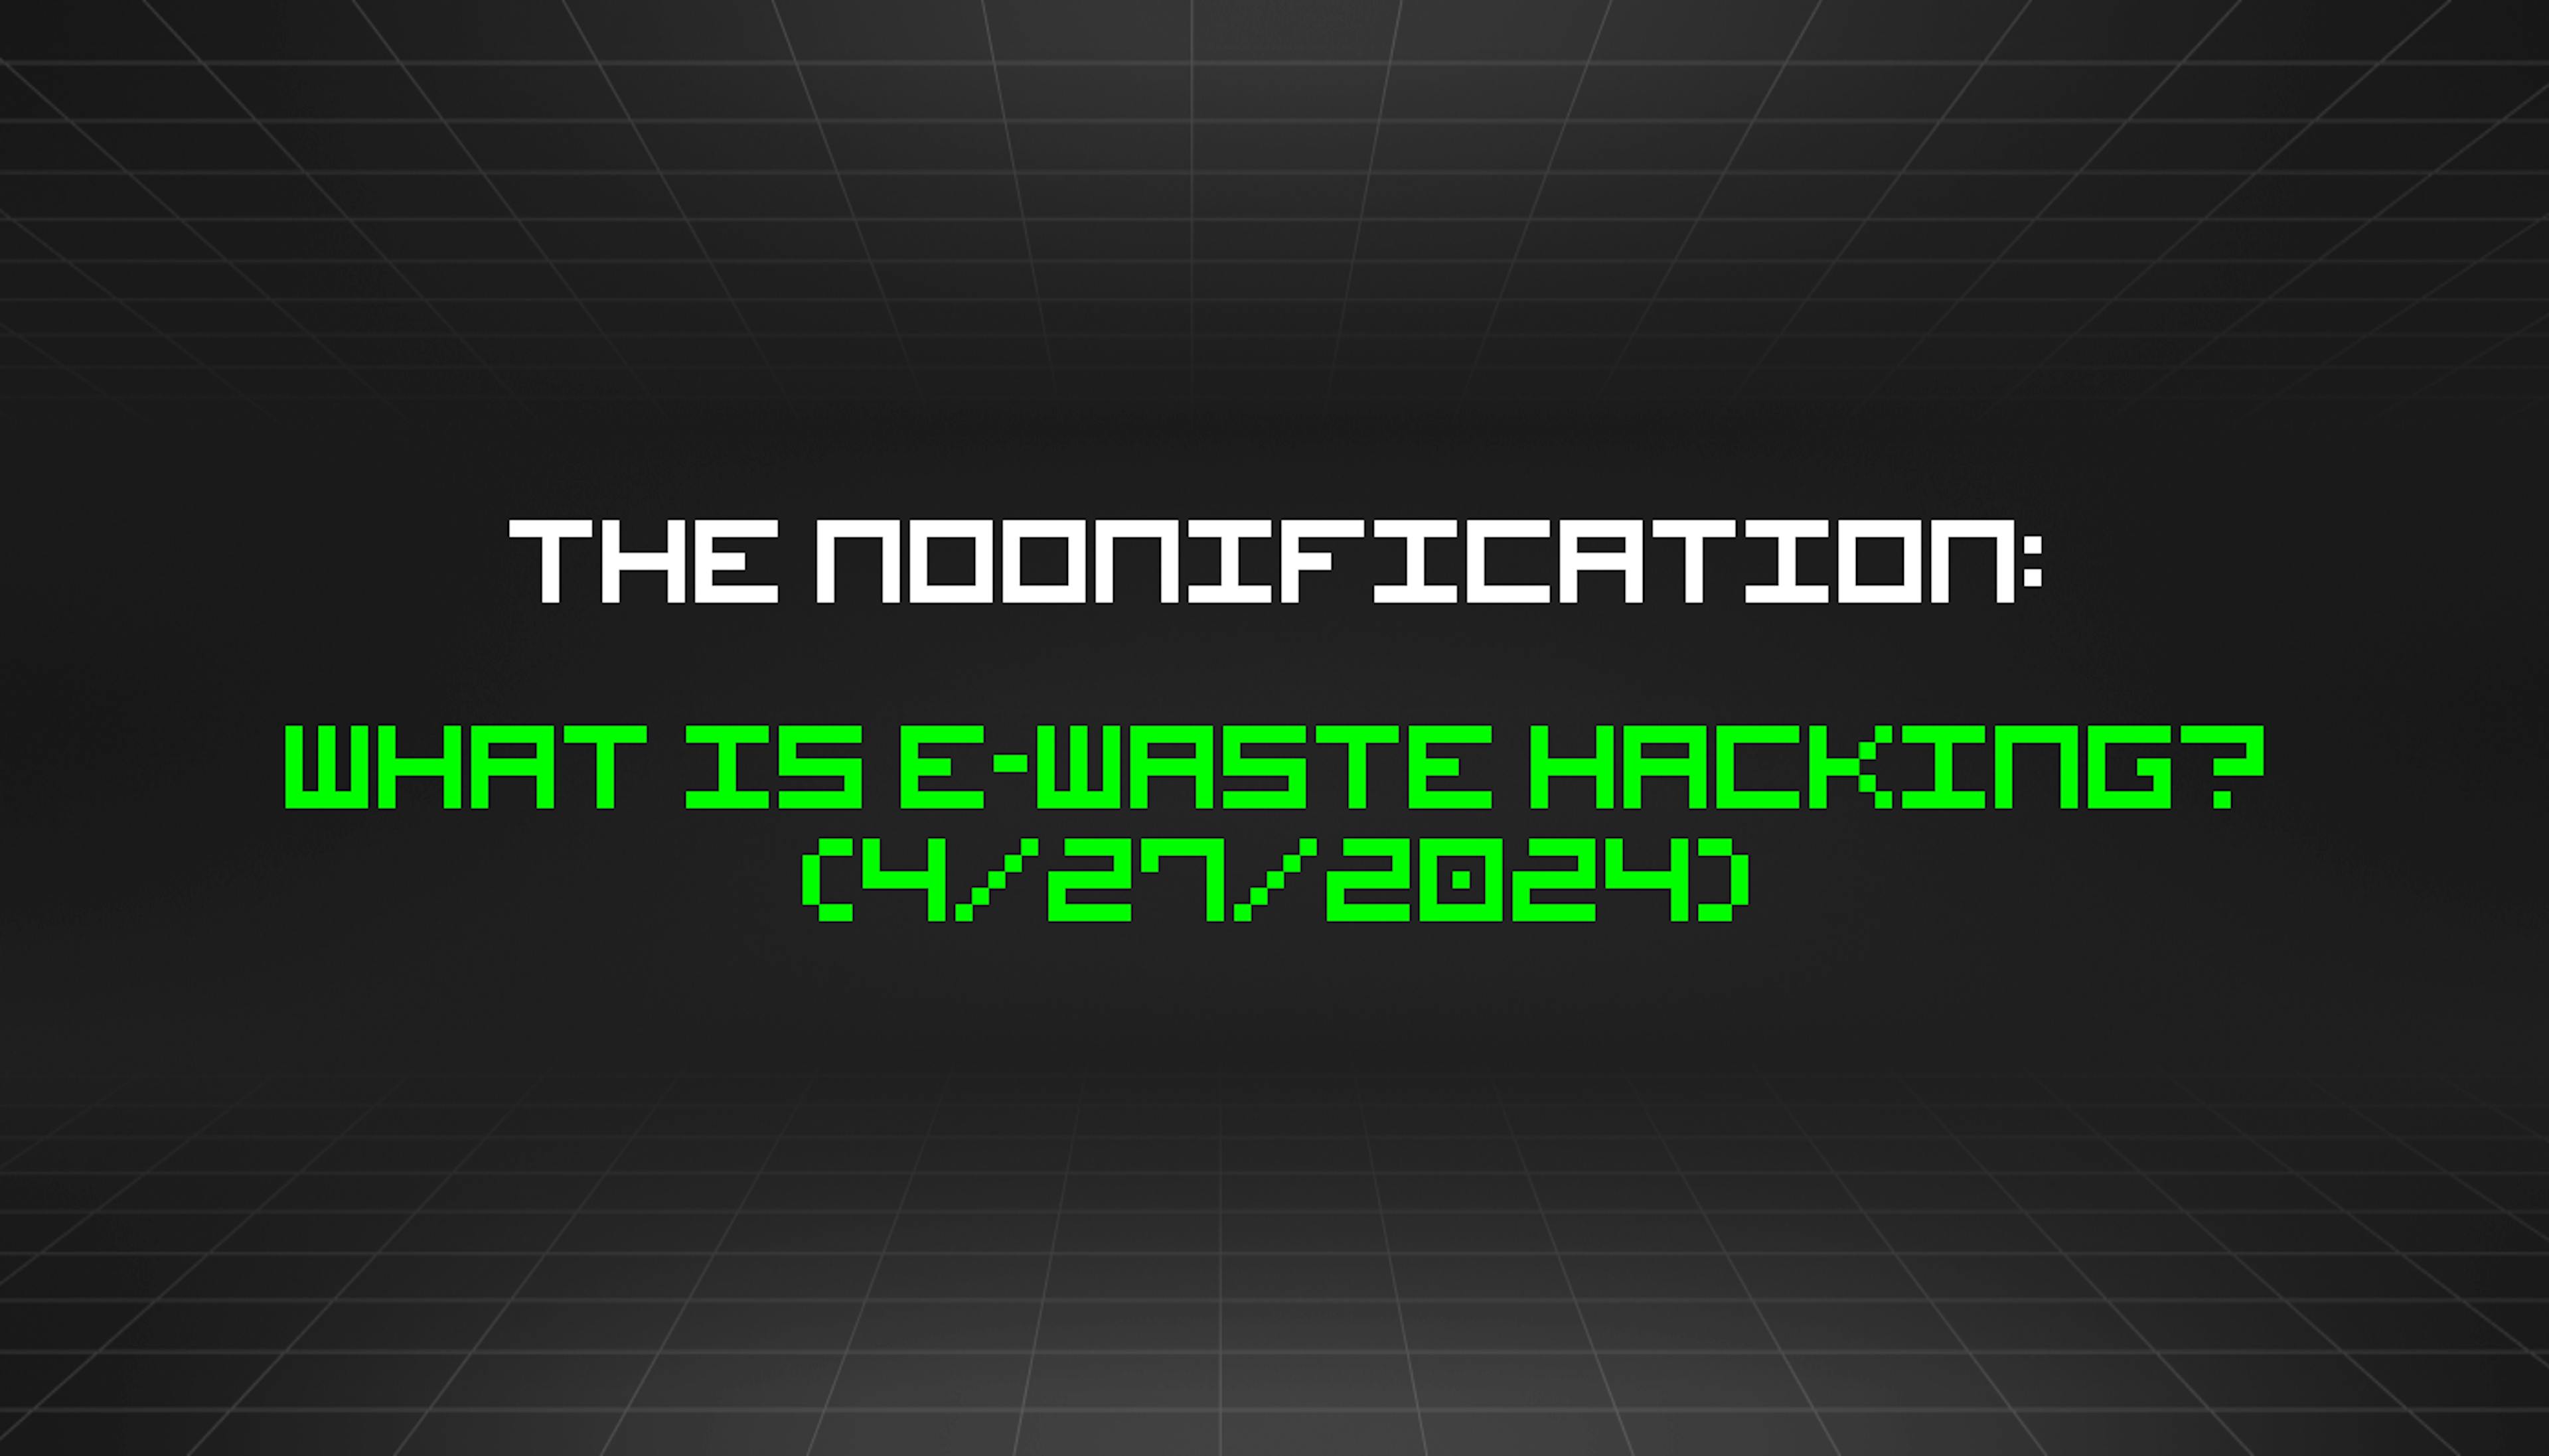 /4-27-2024-noonification feature image